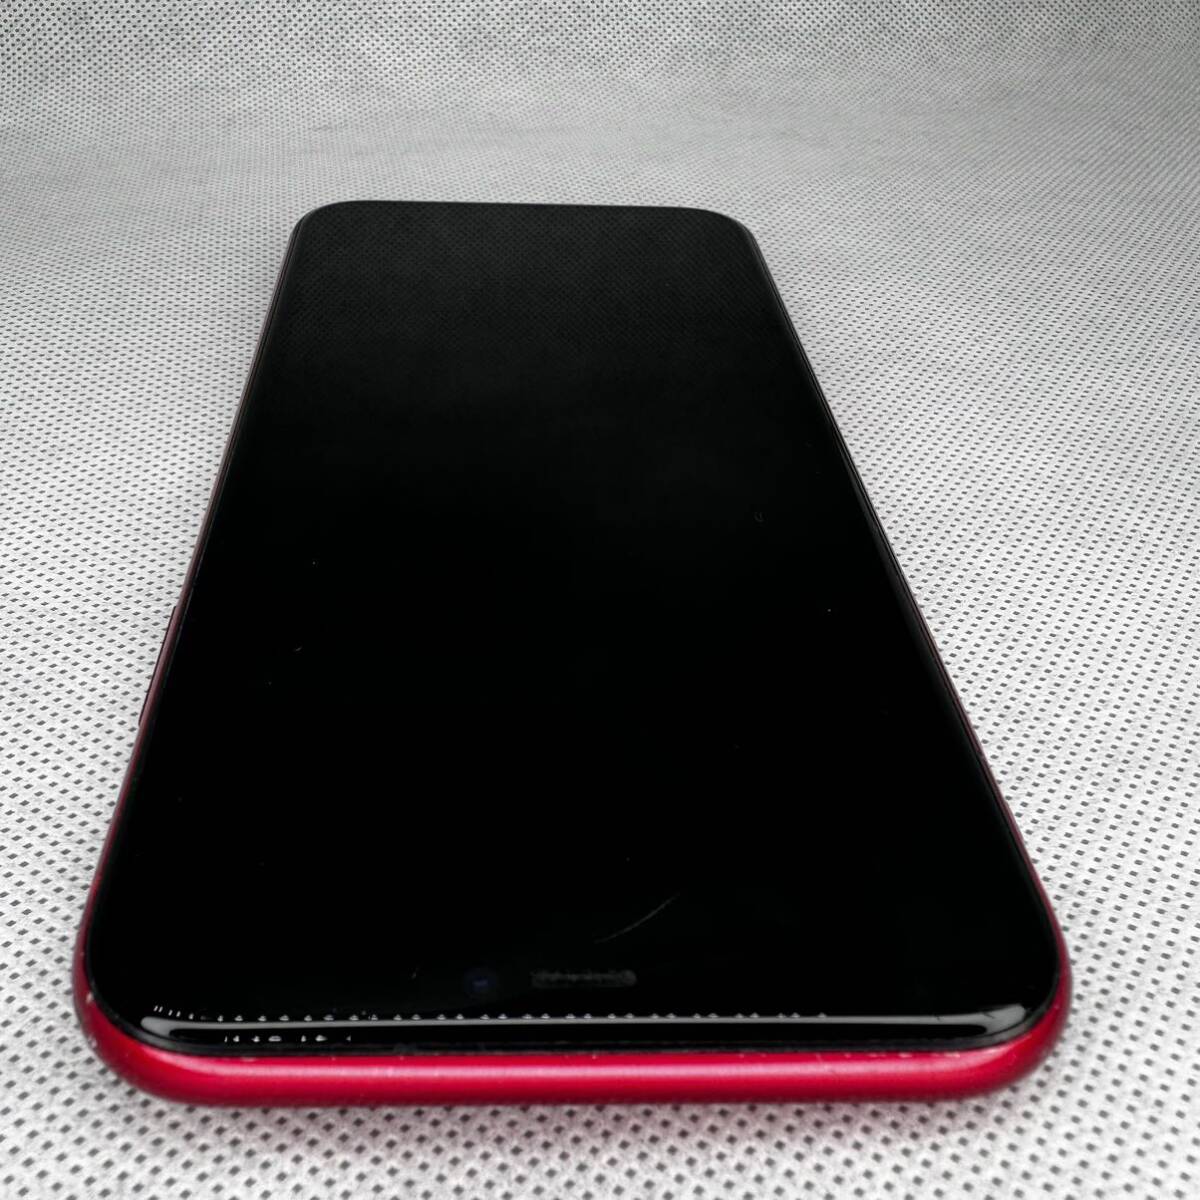 Apple iPhone 11 64GB PRODUCT RED MWLV2J/A A2221 判定○ SIMロックなし プロダクトレッド 動作確認済み 箱付き_画像2